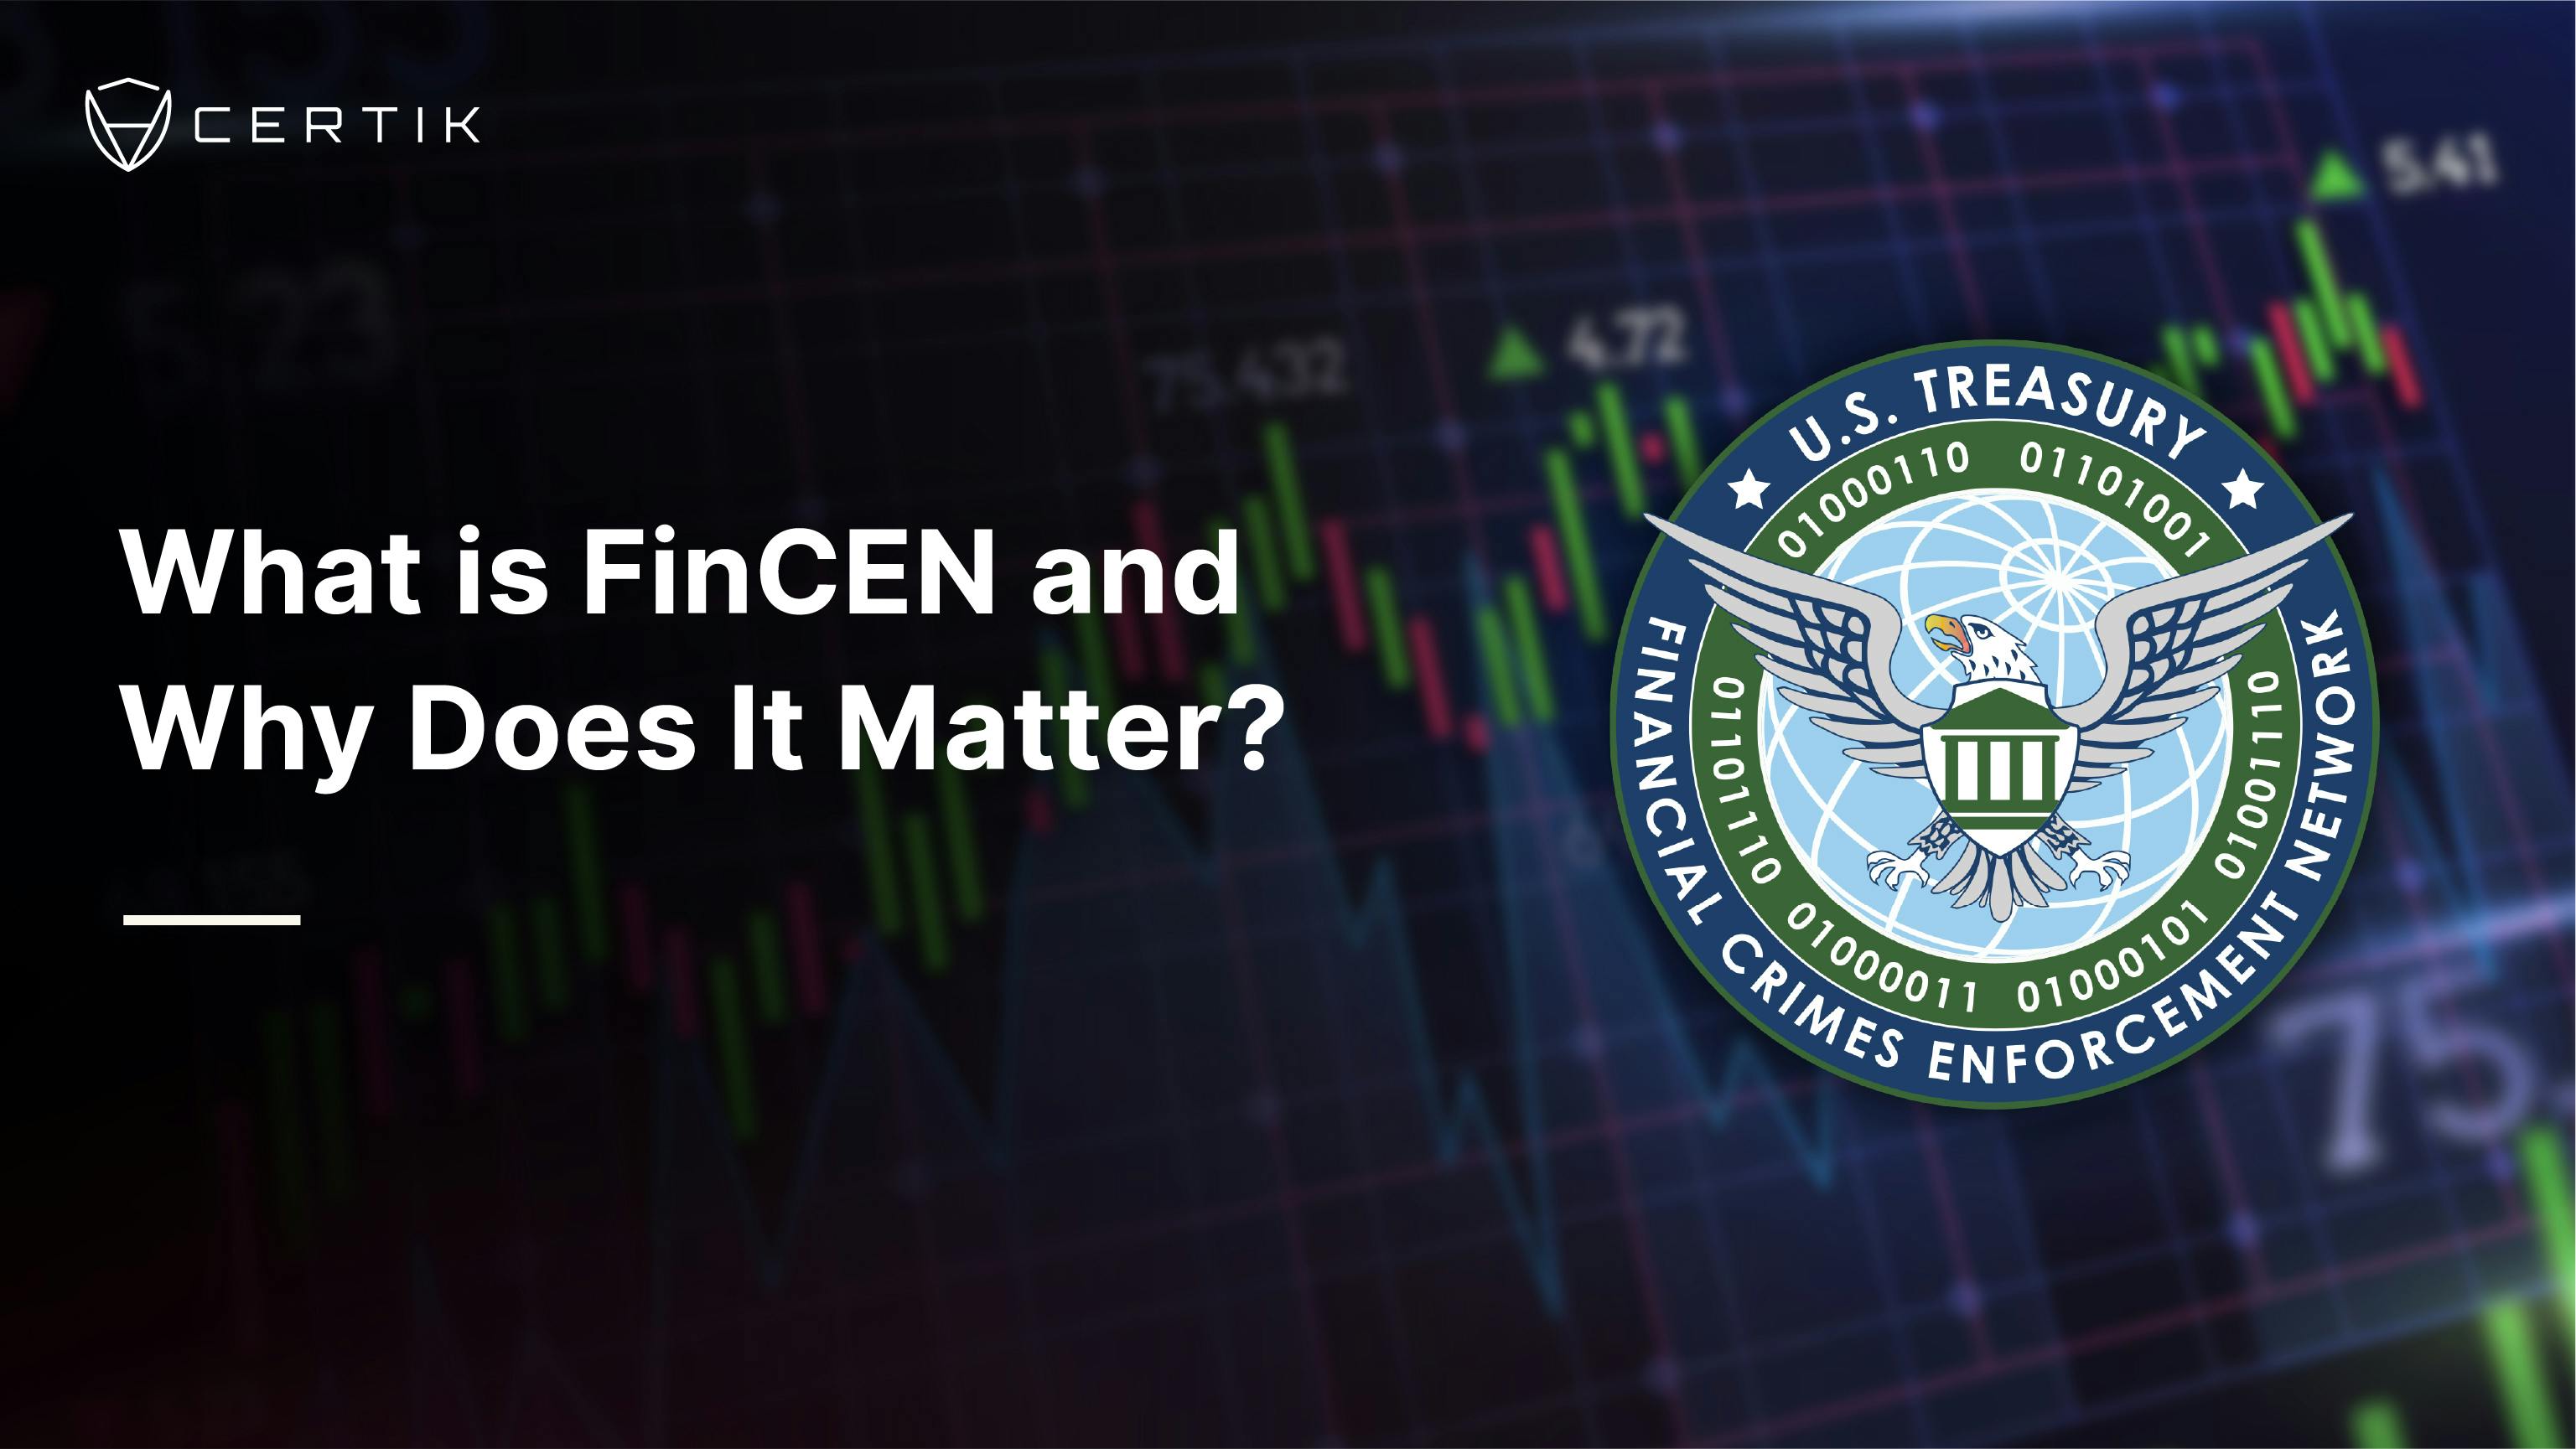 What is FinCEN and Why Does It Matter?